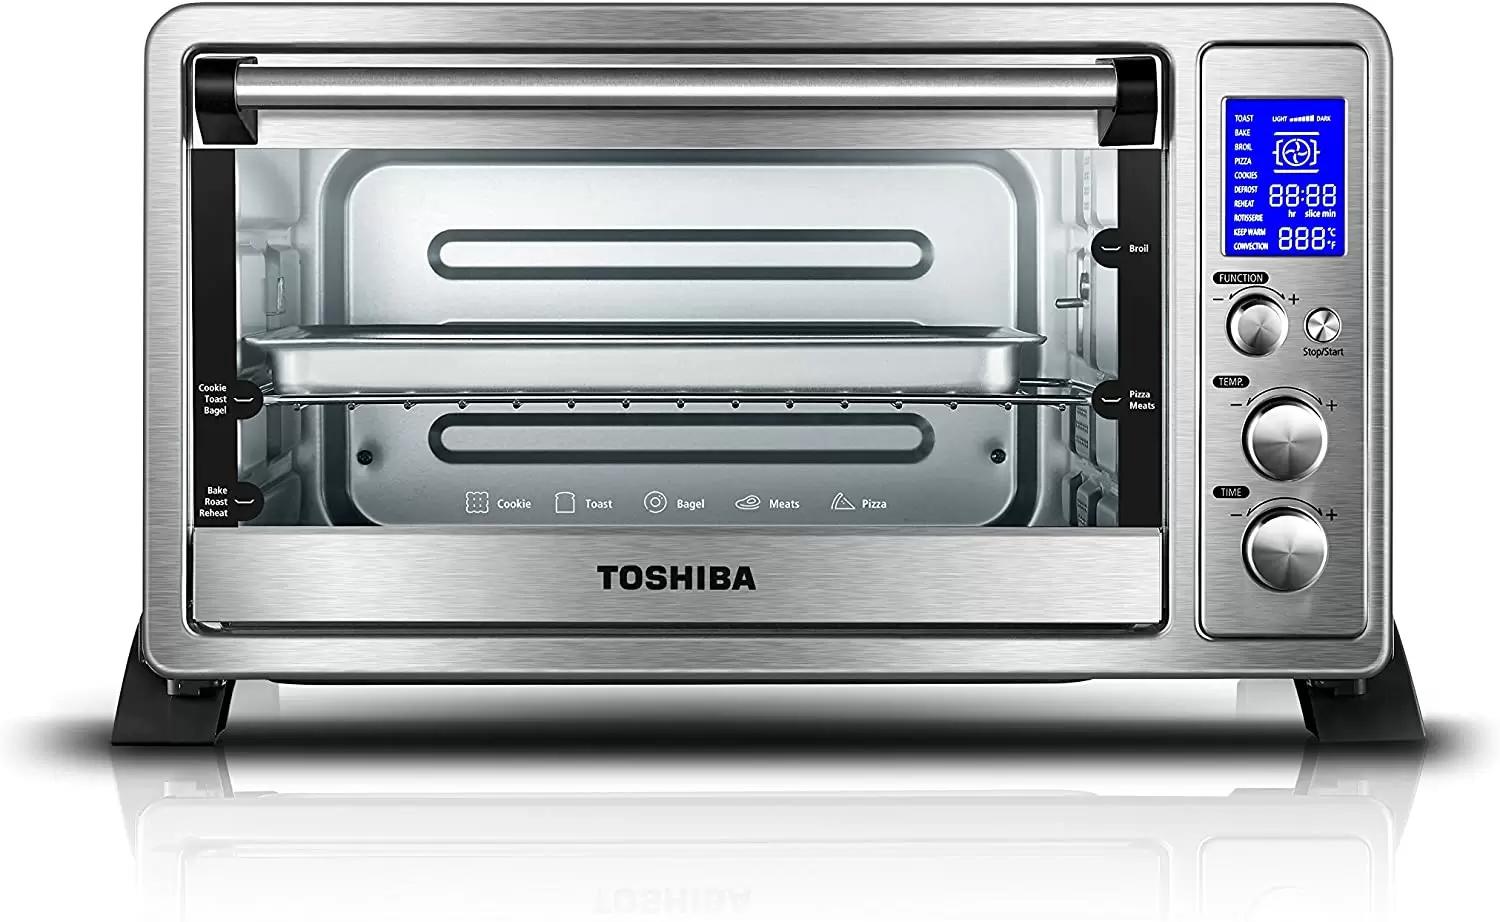 Toshiba 1500W Digital Convection Toaster Oven for $65.99 Shipped